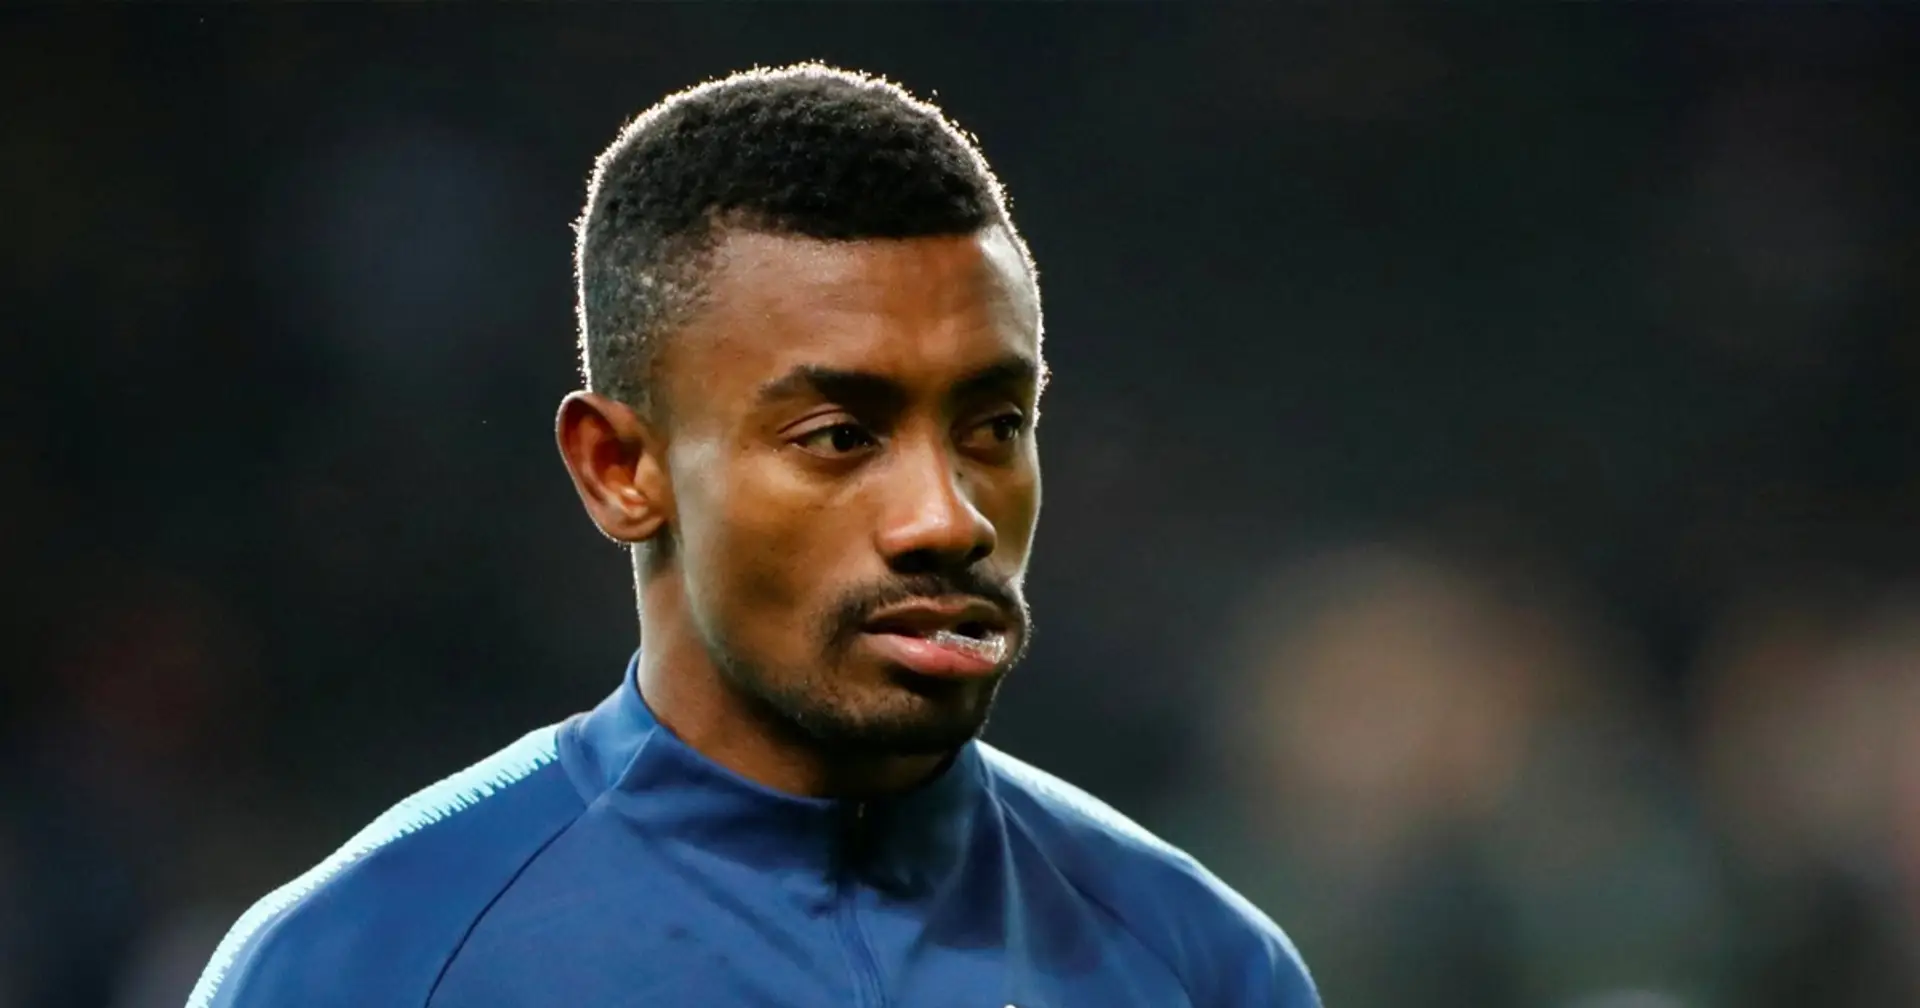 'I'm very curious to see how we'll manage that': Salomon Kalou warns returning to football might be awkward